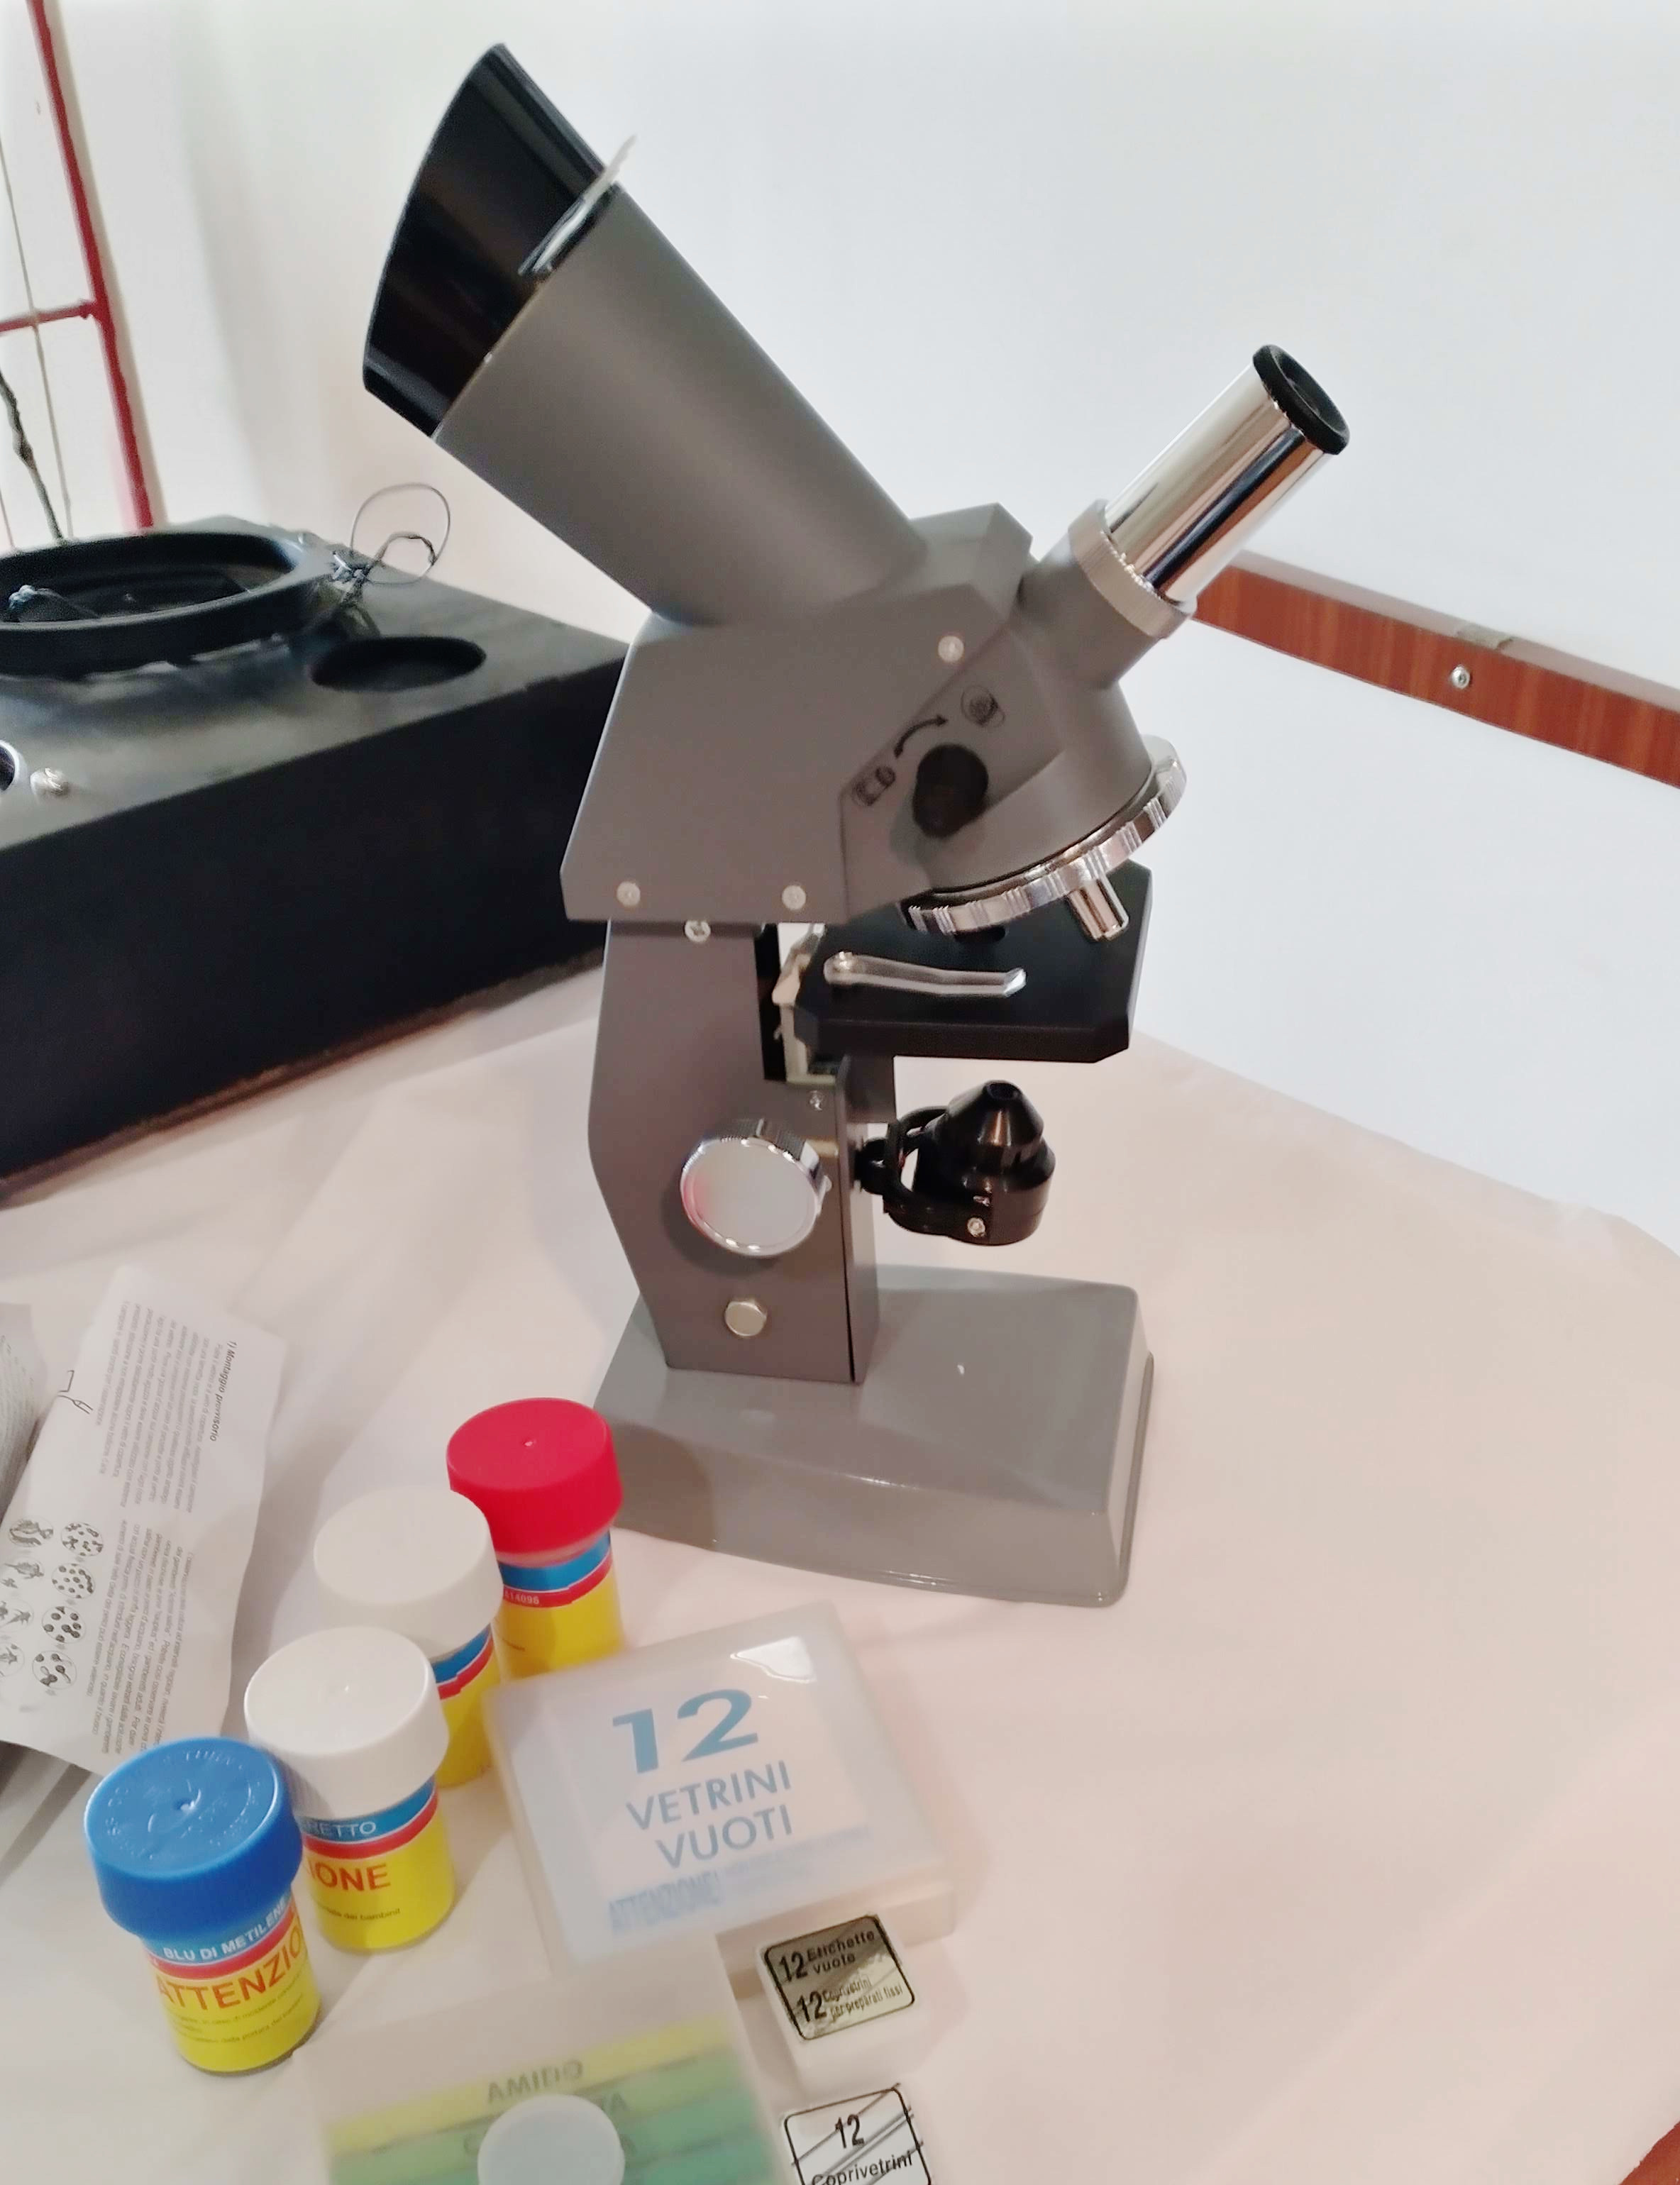 Tear down of the toy microscope